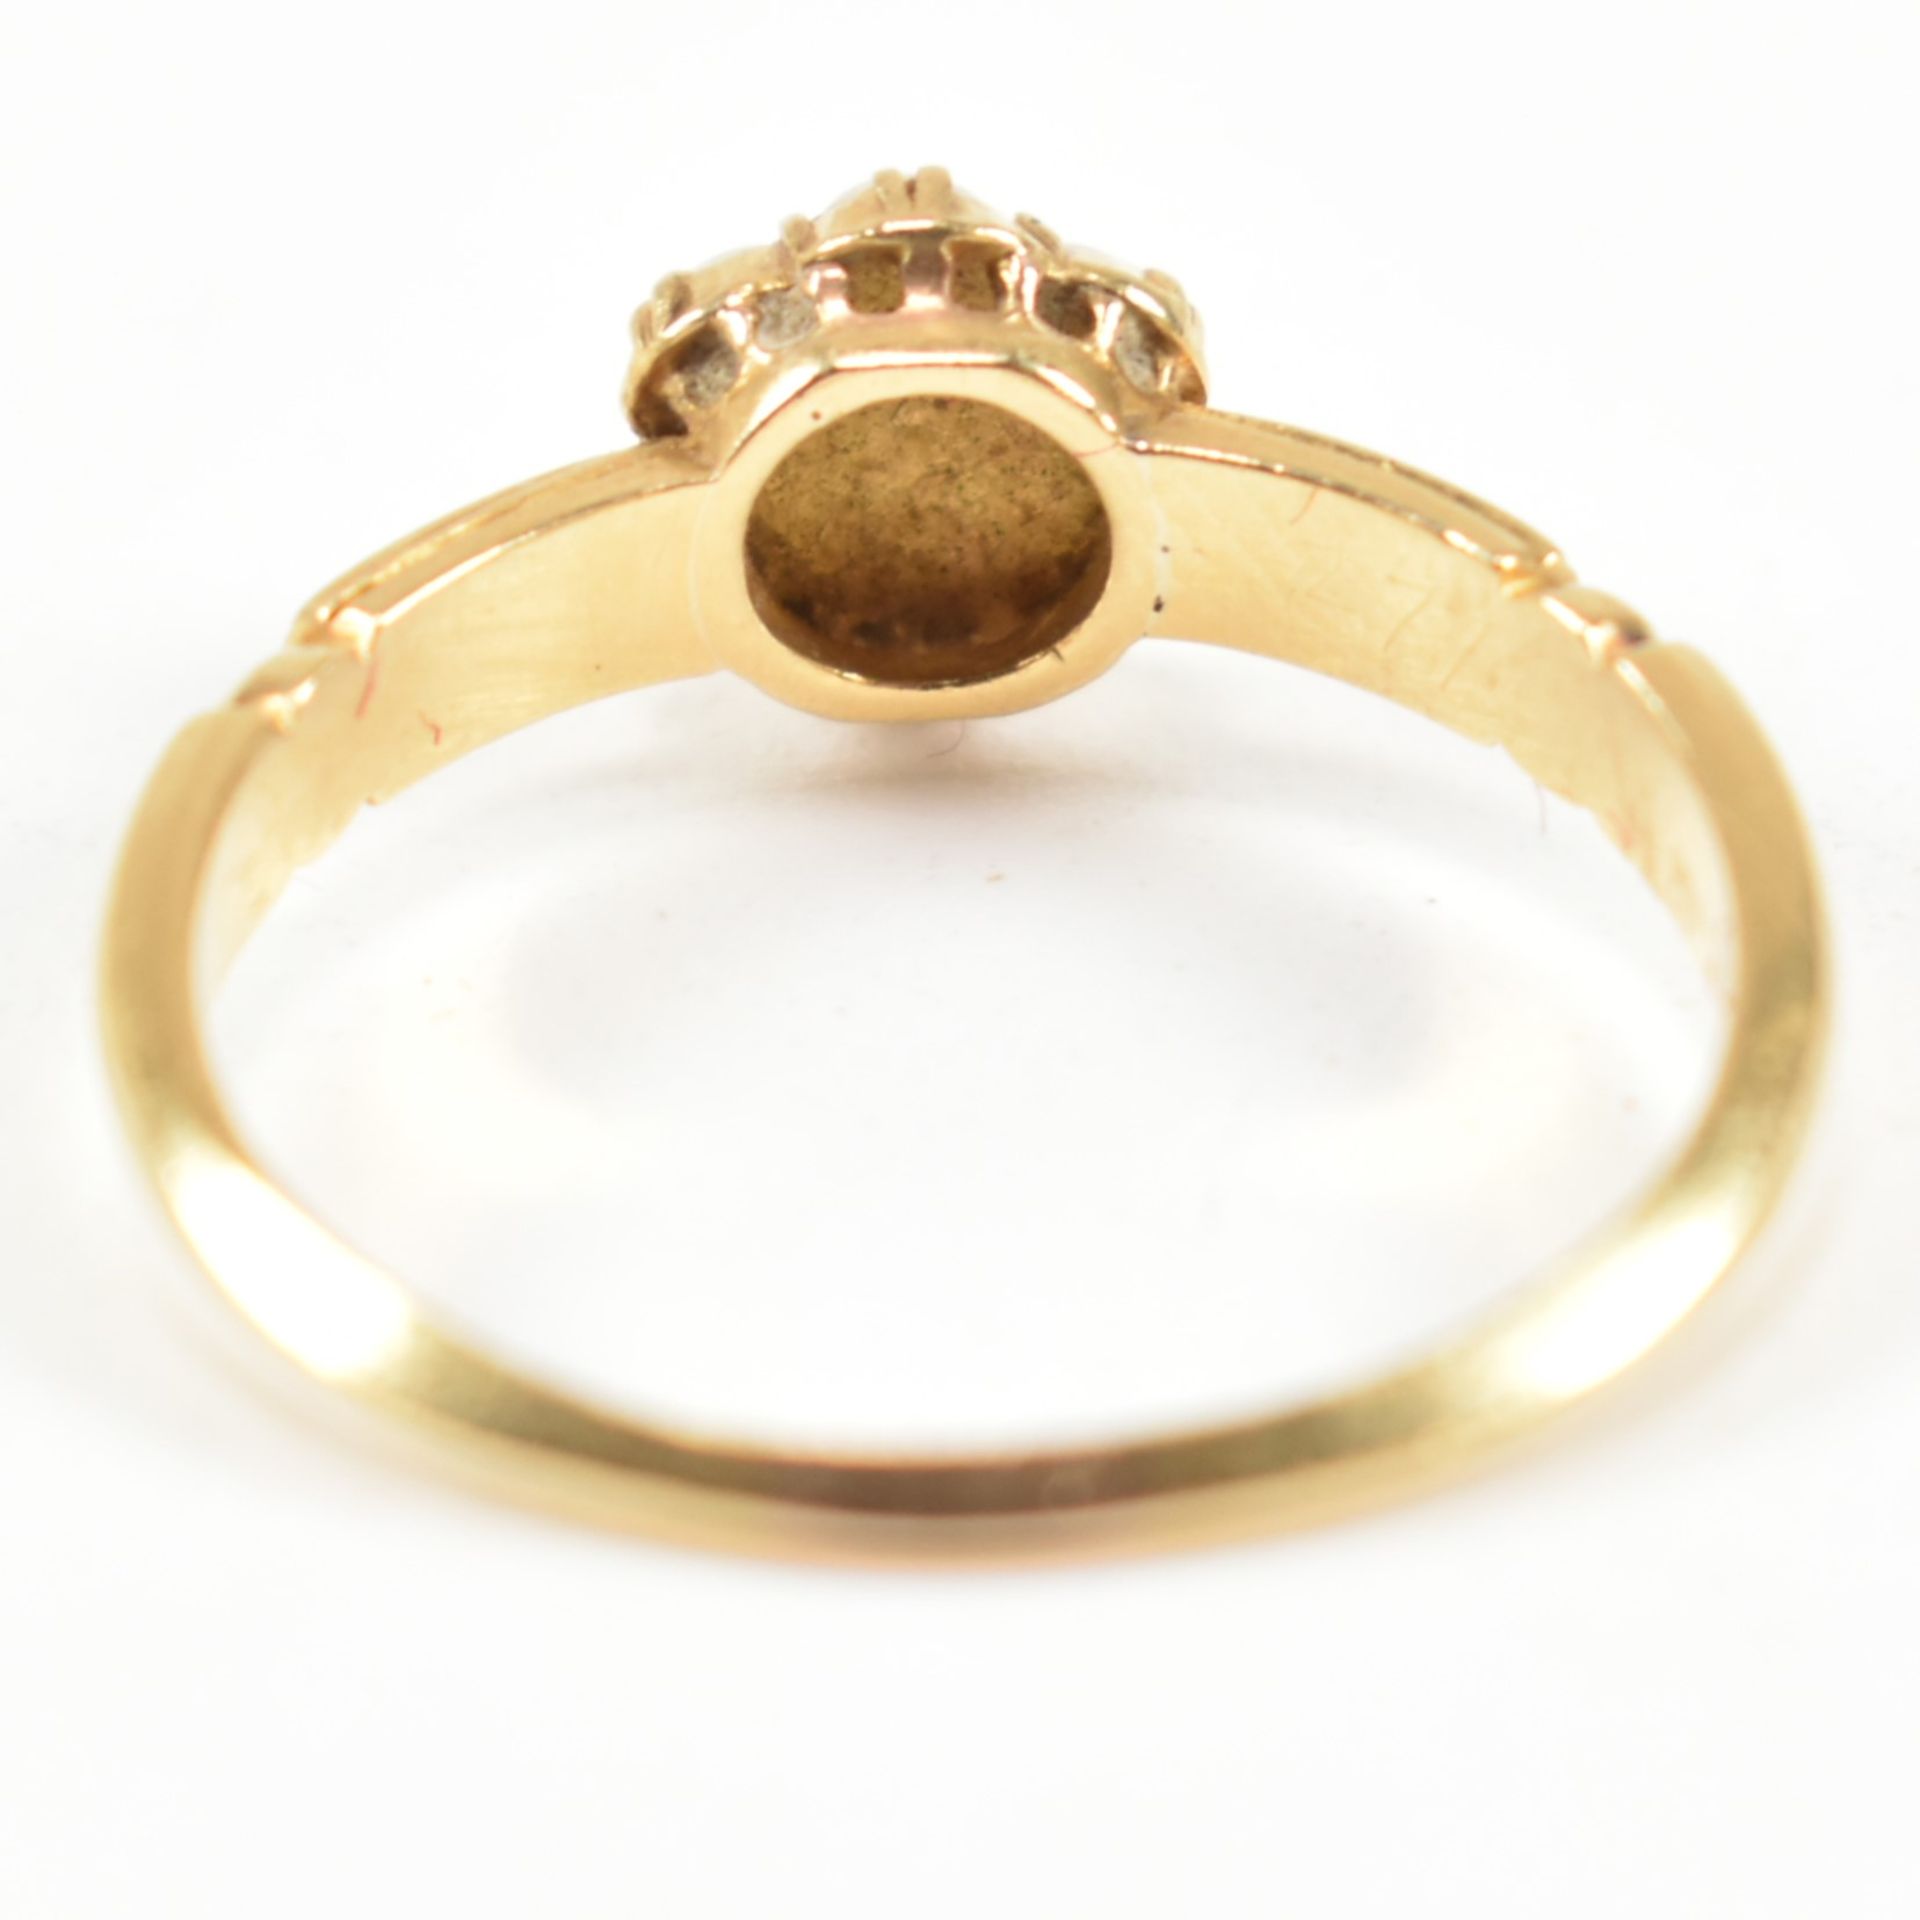 VICTORIAN HALLMARKED 18CT GOLD & SEED PEARL CLUSTER RING - Image 3 of 9